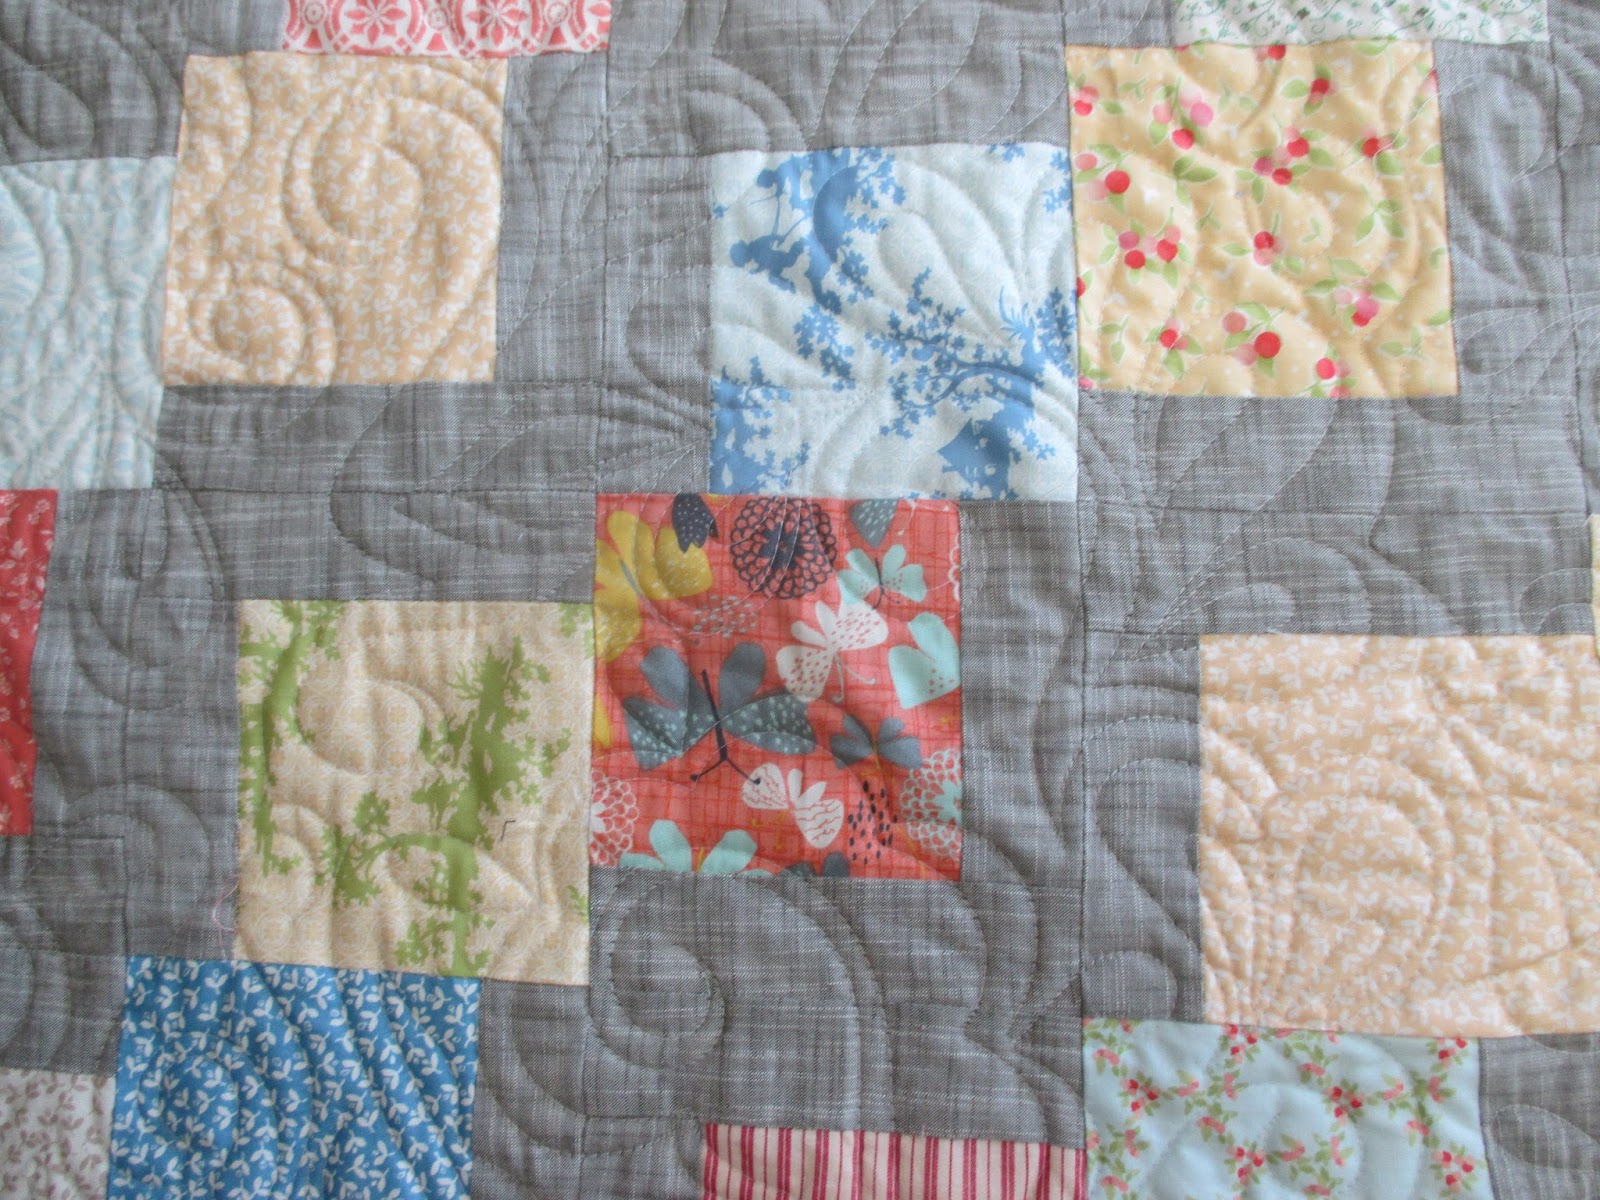 Down To Sew: Becki's charm squares quilt